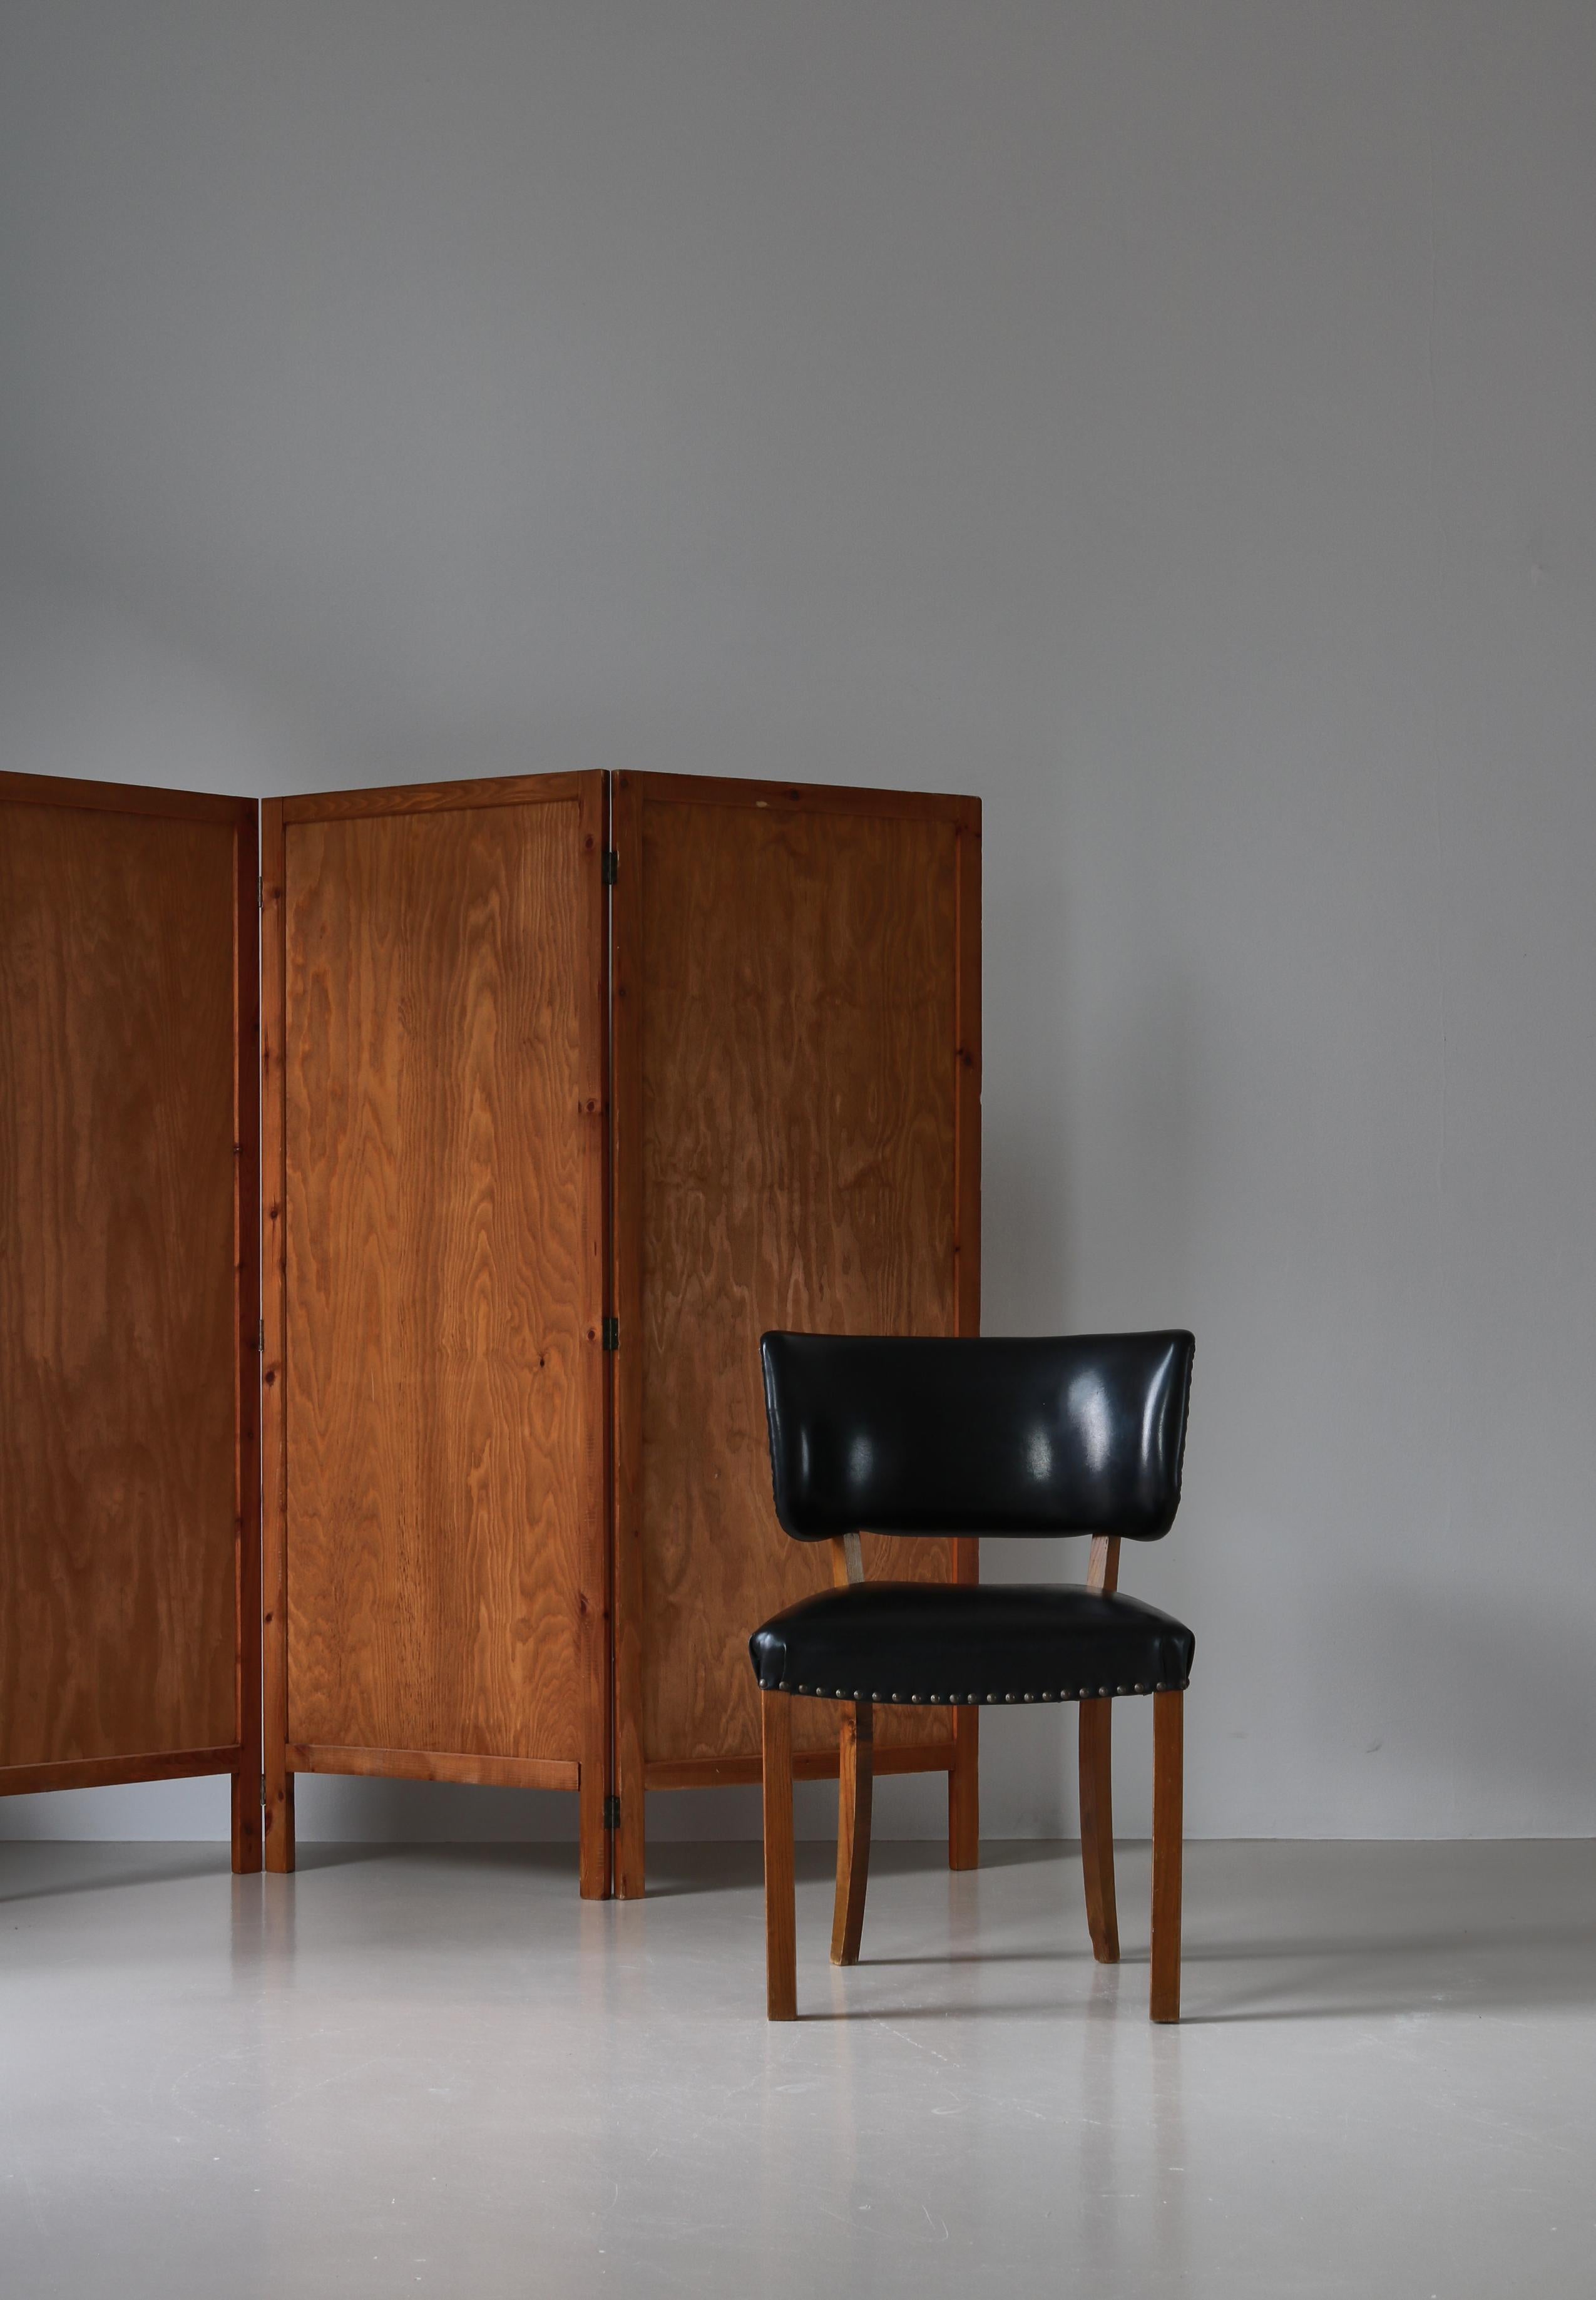 Set of Danish Modern side chairs made in the 1940s and attributed to Danish architect Magnus Stephensen. Executed in solid elm tree and black leatherette. Big chairs with wonderful organic curves.

Very similar to Magnus Stephensen chair model